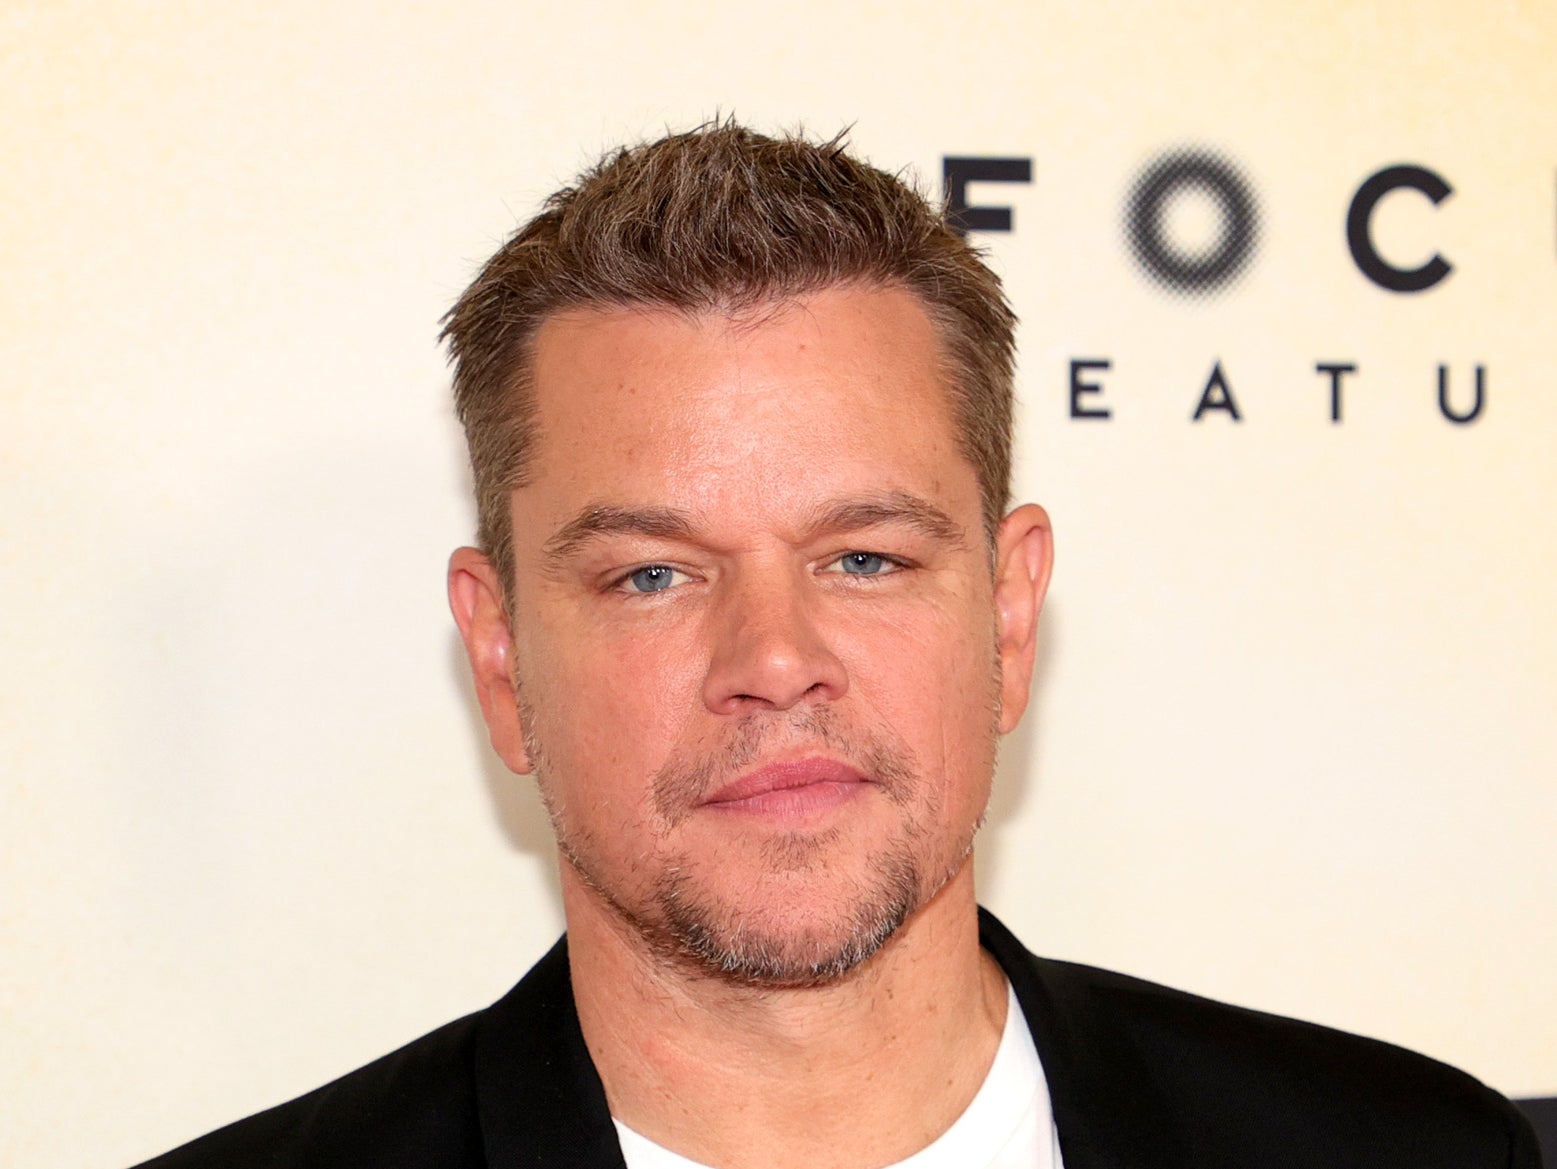 Matt Damon was mauled for a ‘Fortune Favours the Brave’ advert promoting Crypto.com after the market value plummeted